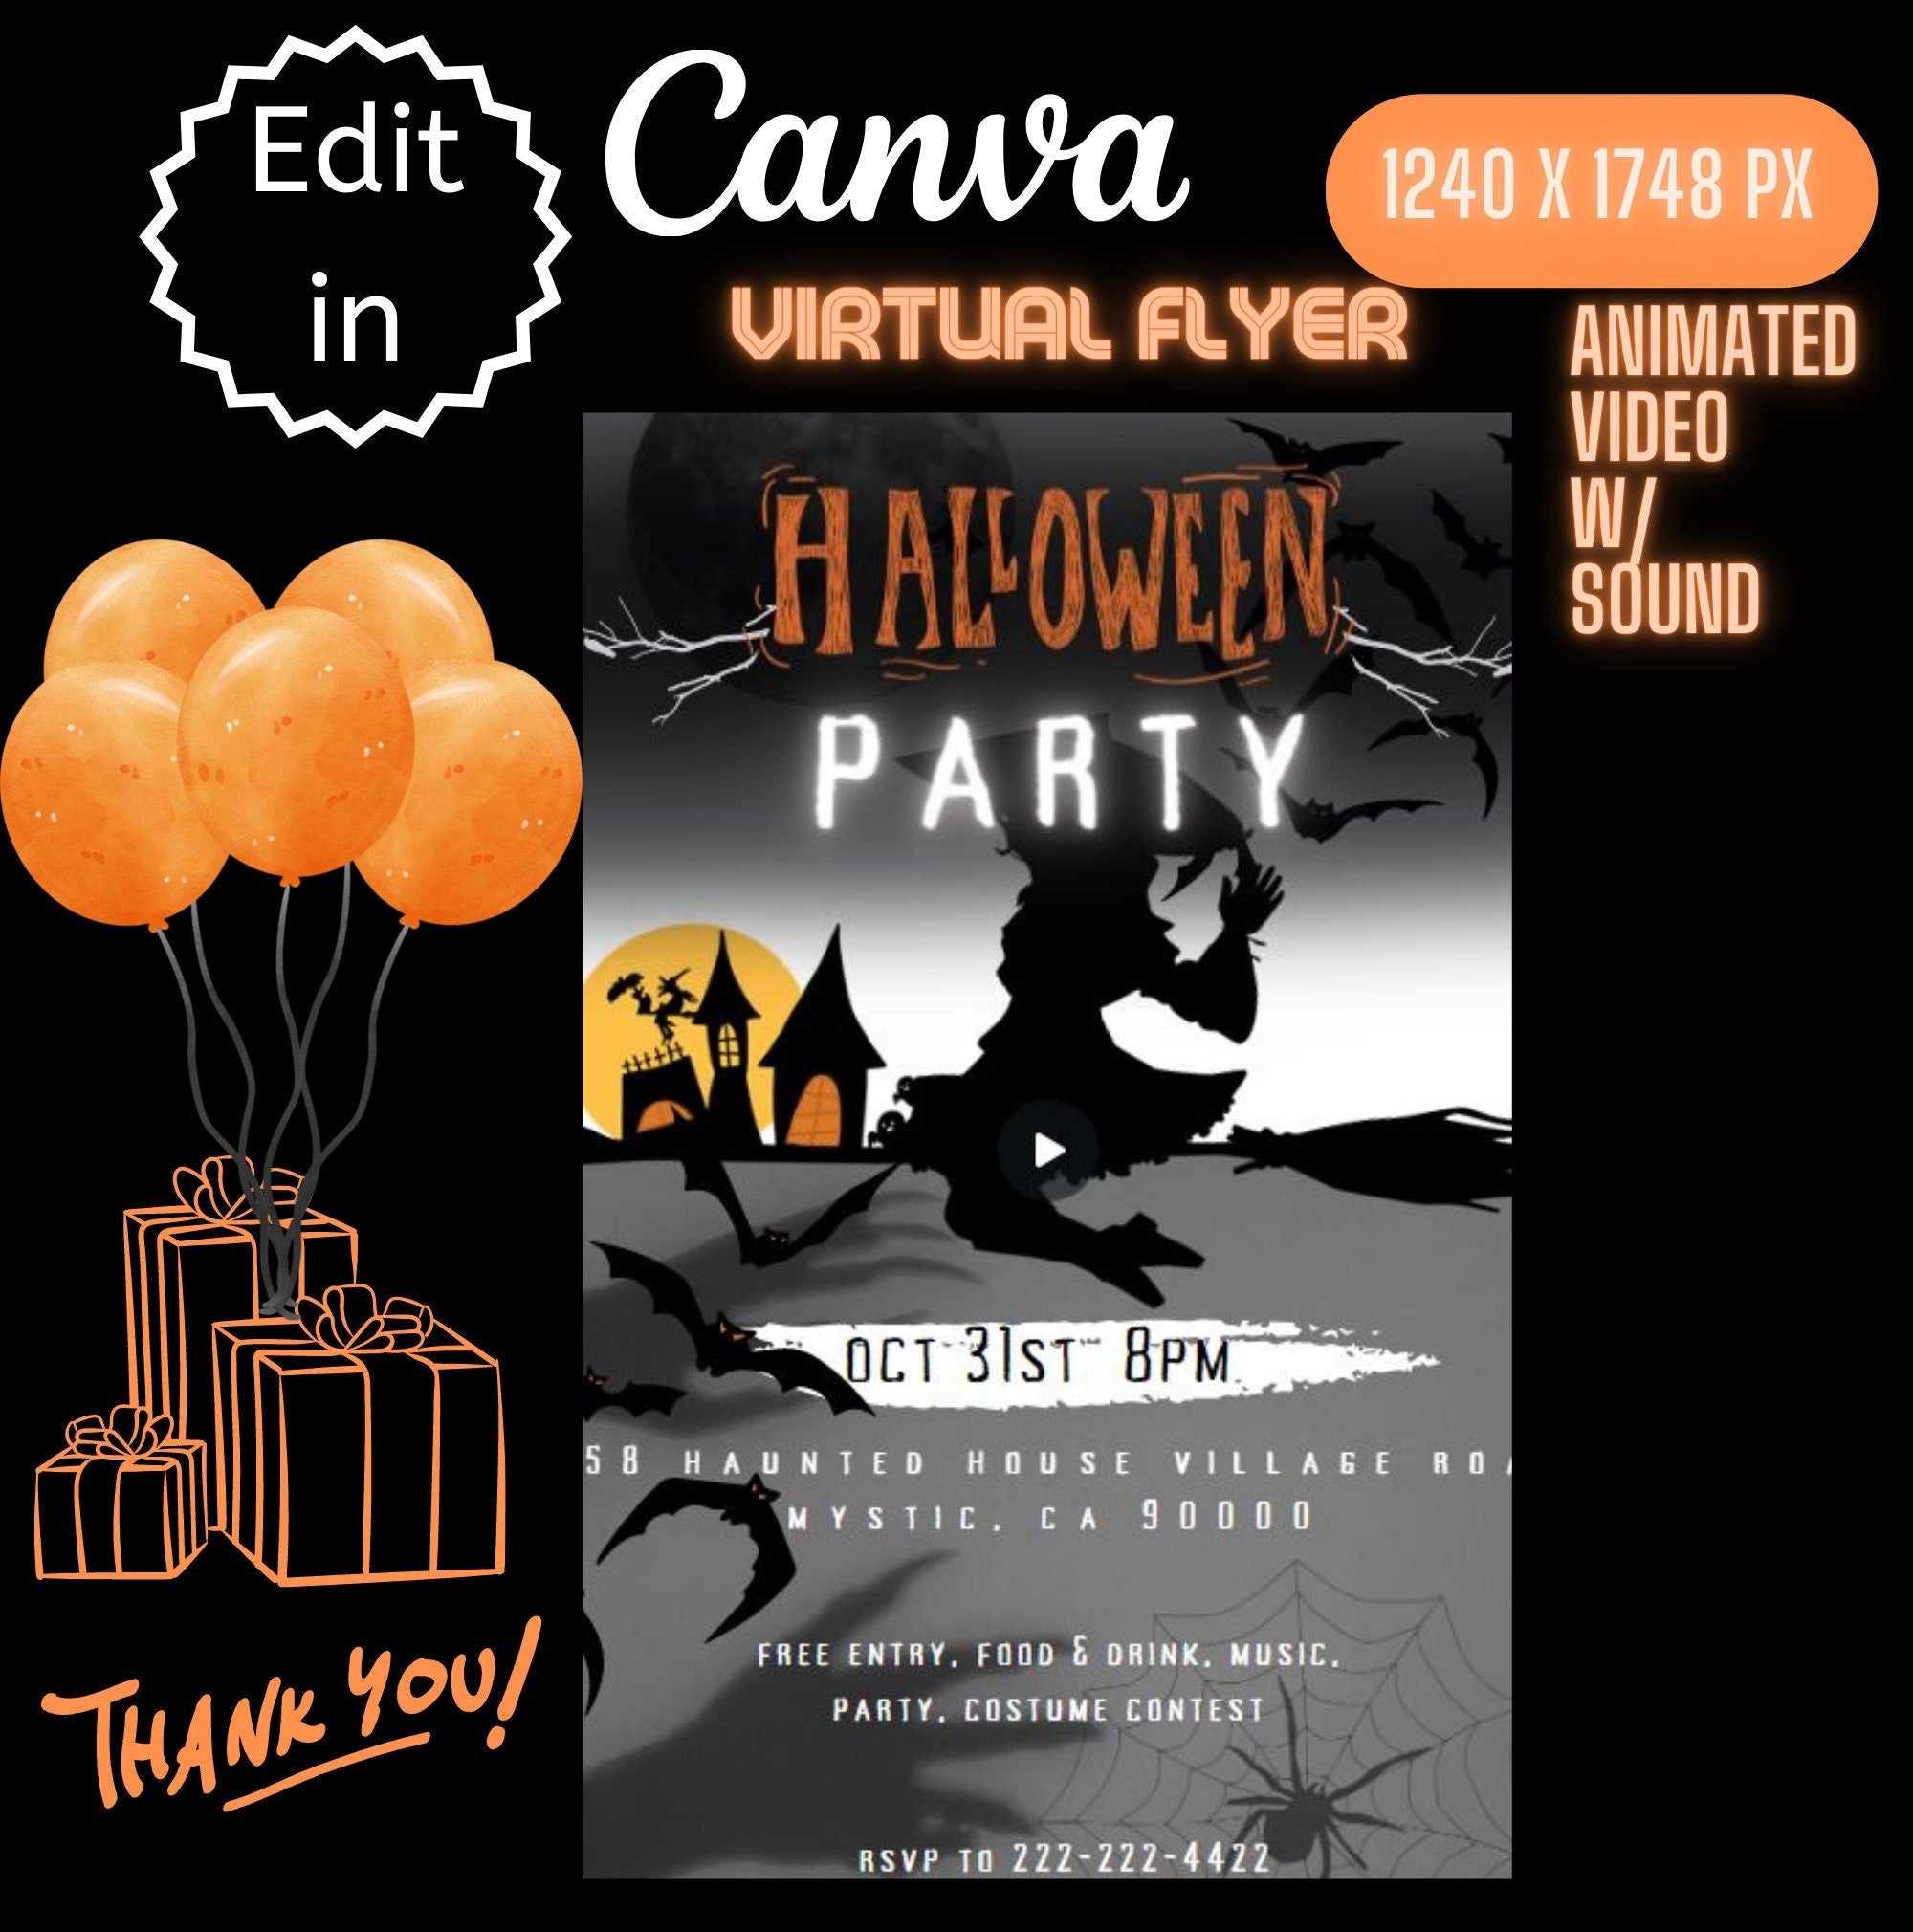 Animated MP4 Witch Virtual Invite larger size 1240x1748  Halloween Party Instagram Digital E-Vite with sound, Print - Editable in Canva